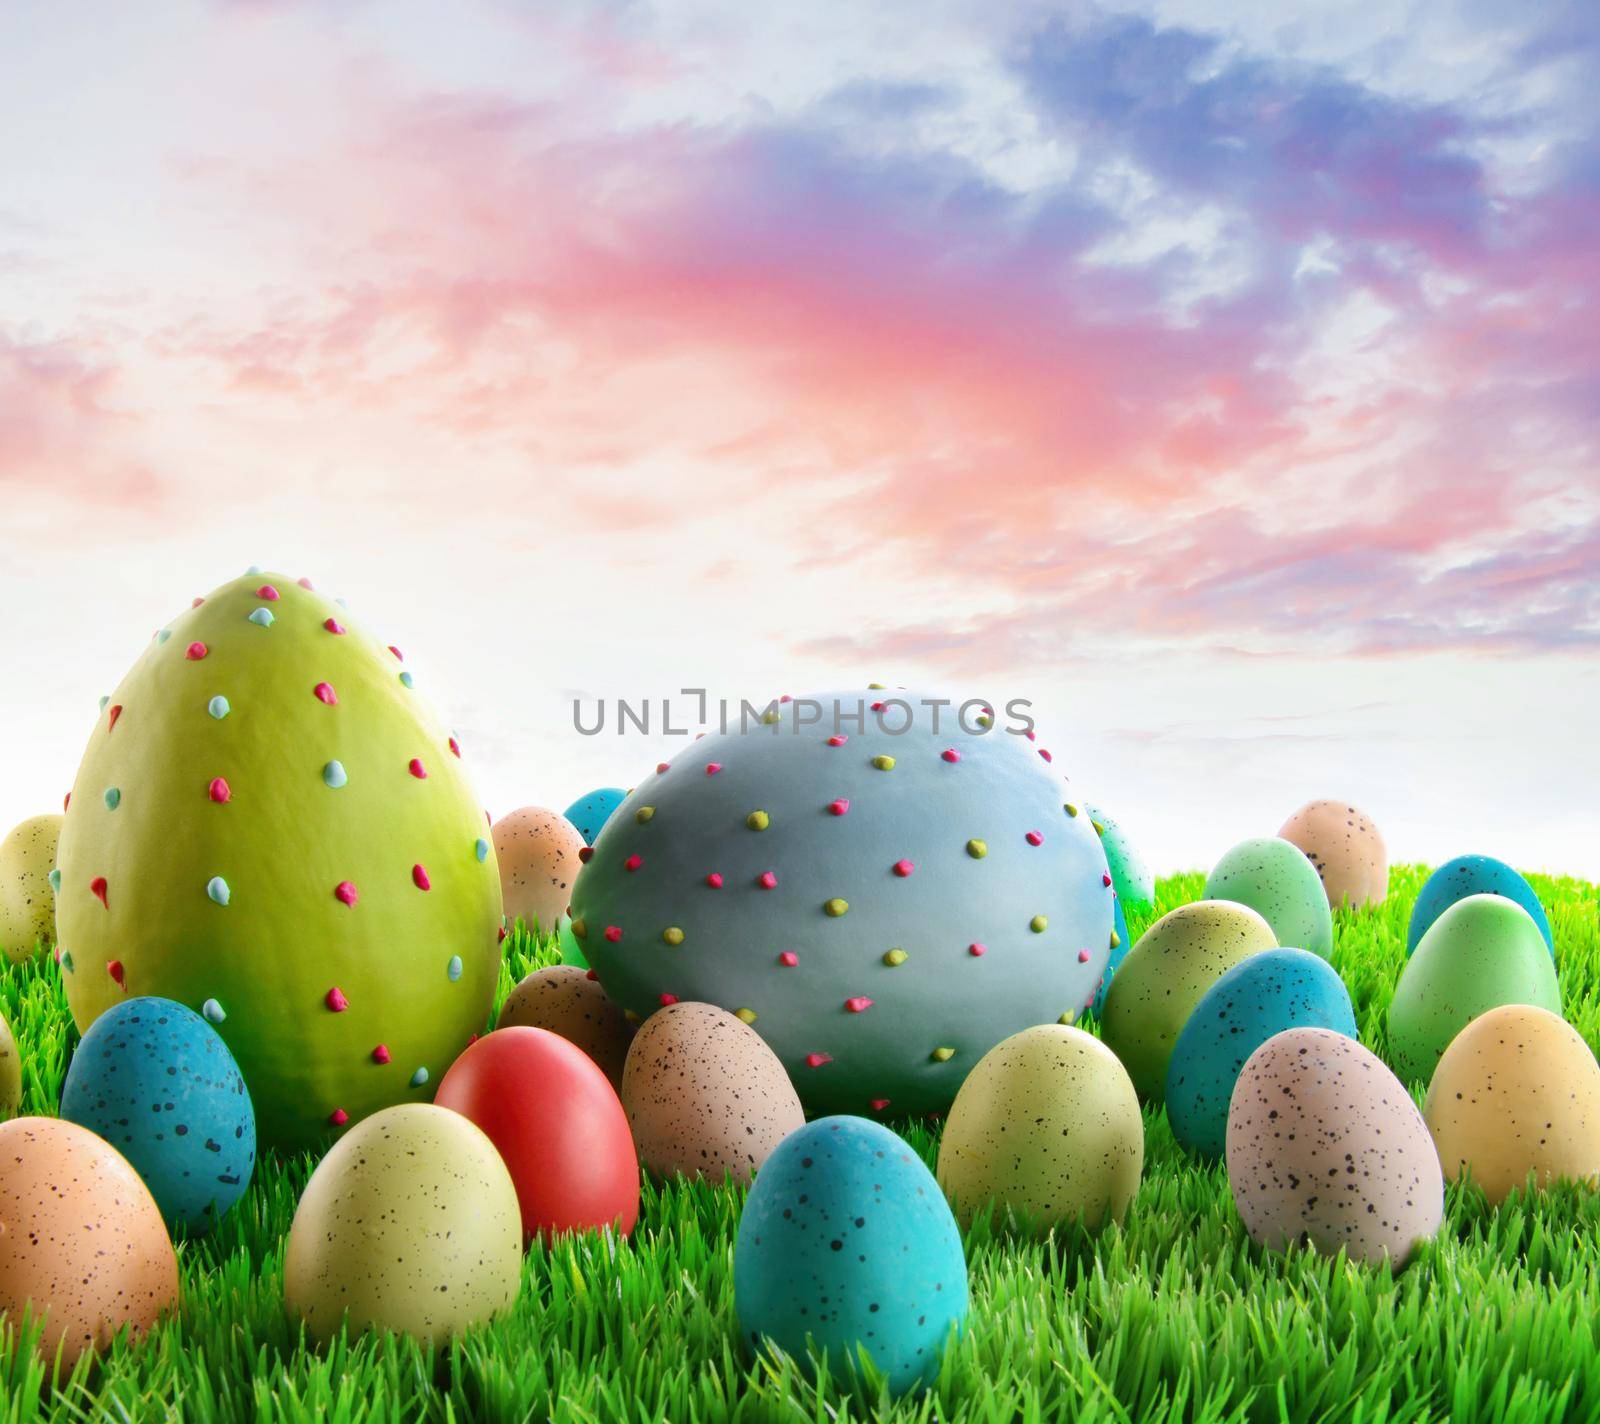 Colorful decorated eggs in the grass with sky in background